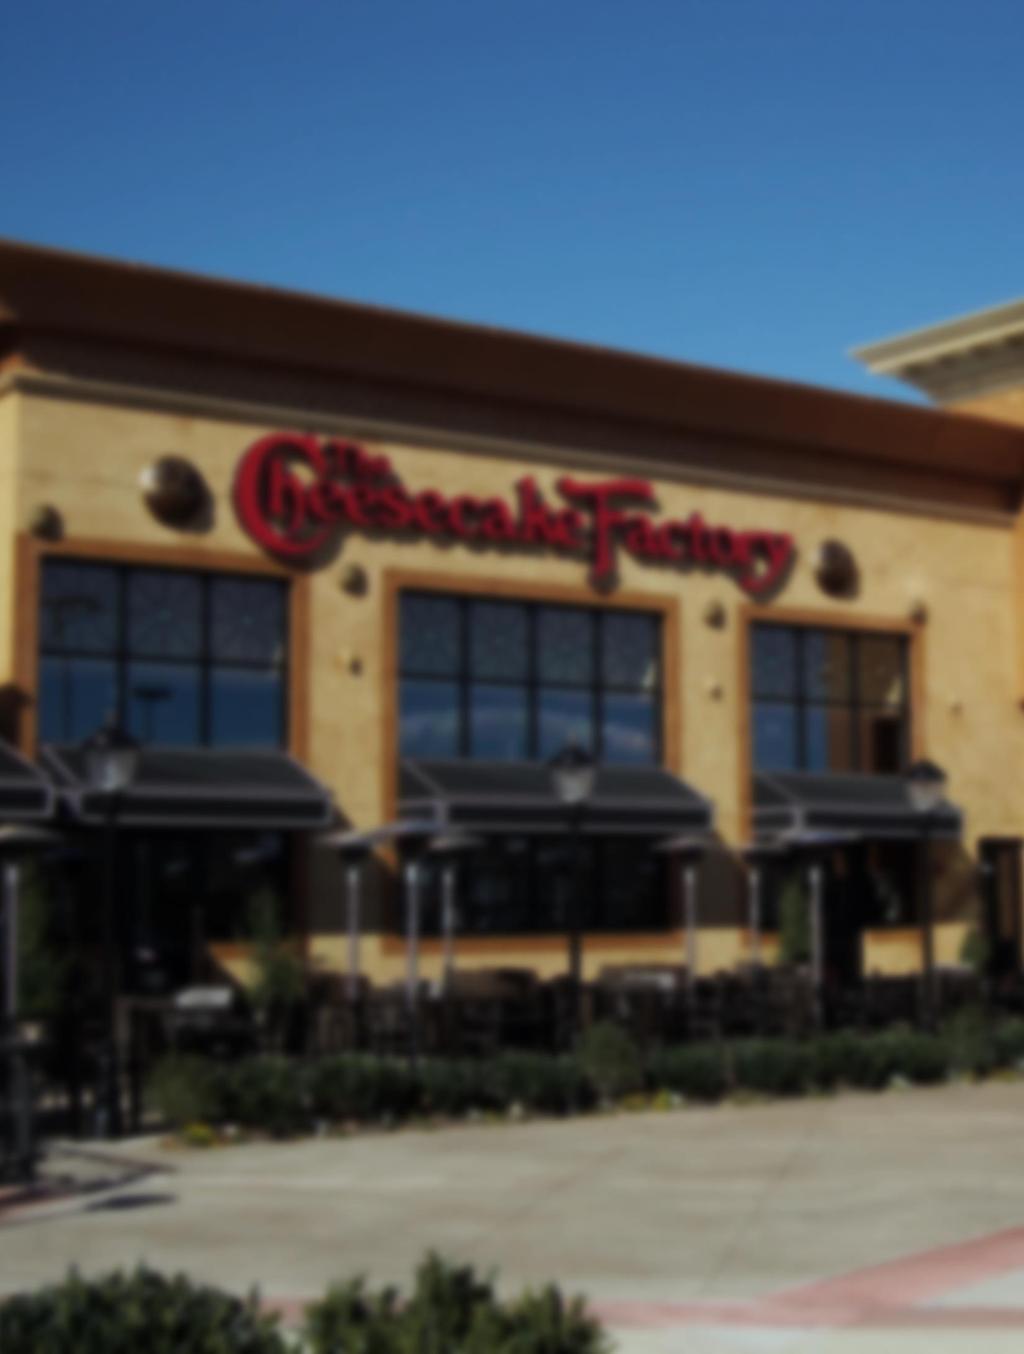 VISITATION FREQUENCY 28% OF RECENT CHEESECAKE FACTORY VISITORS VISITED THE CHAIN ONCE EVERY SIX